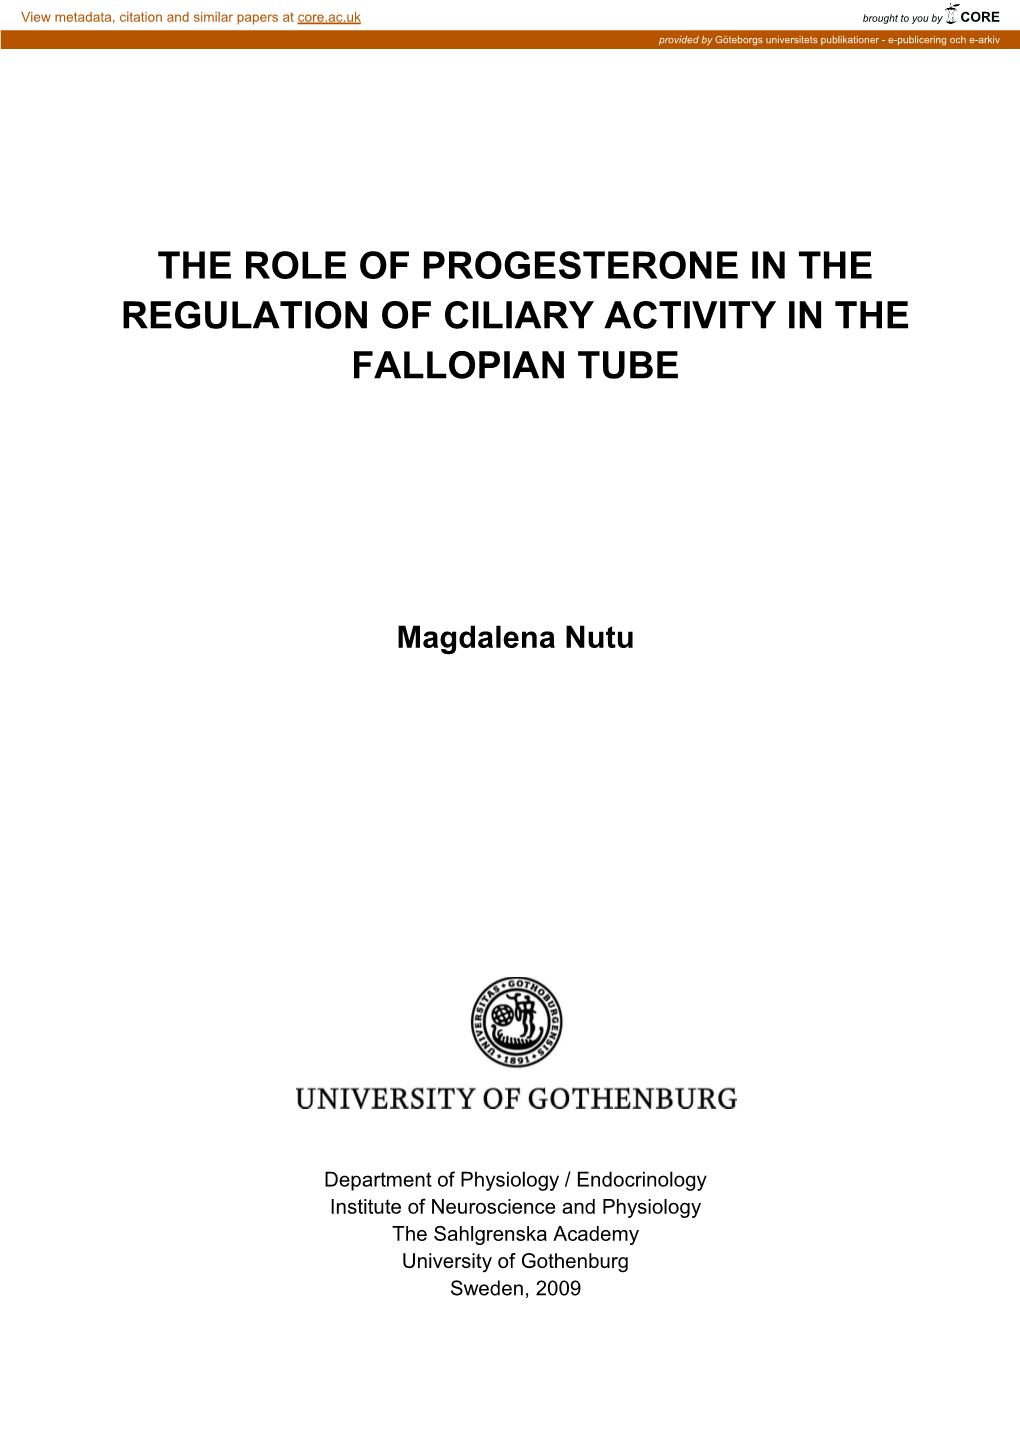 The Role of Progesterone in the Regulation of Ciliary Activity in the Fallopian Tube